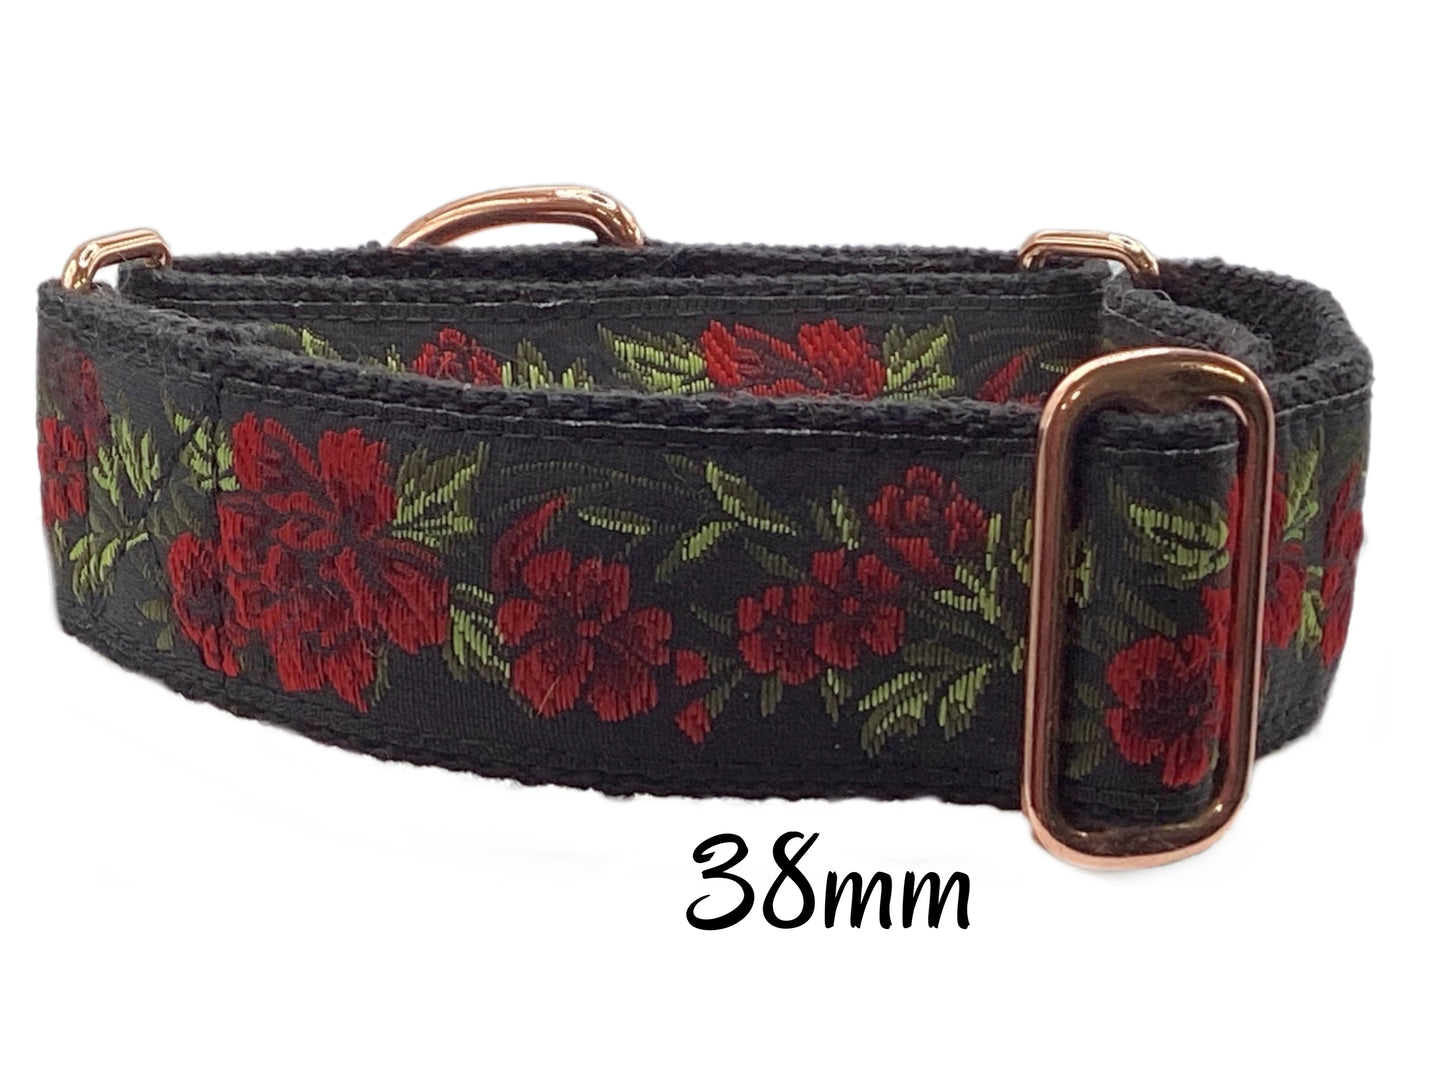 Large martingale collar for the bigger dogs! Beautiful red floral on black